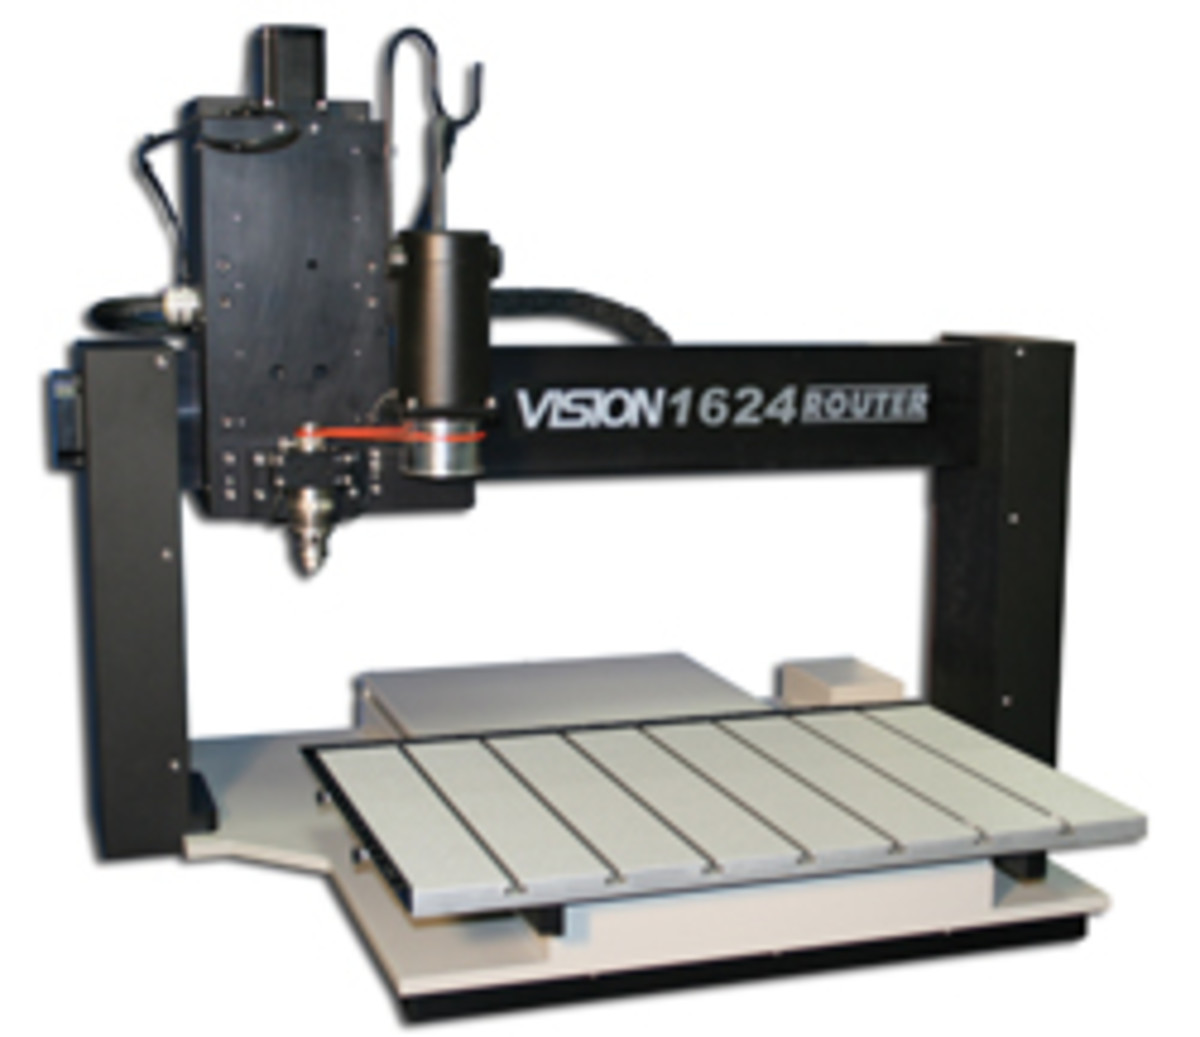 Model 1624R from Vision Engraving and Routing Systems features a 16” x 24” aluminum T-slot table.